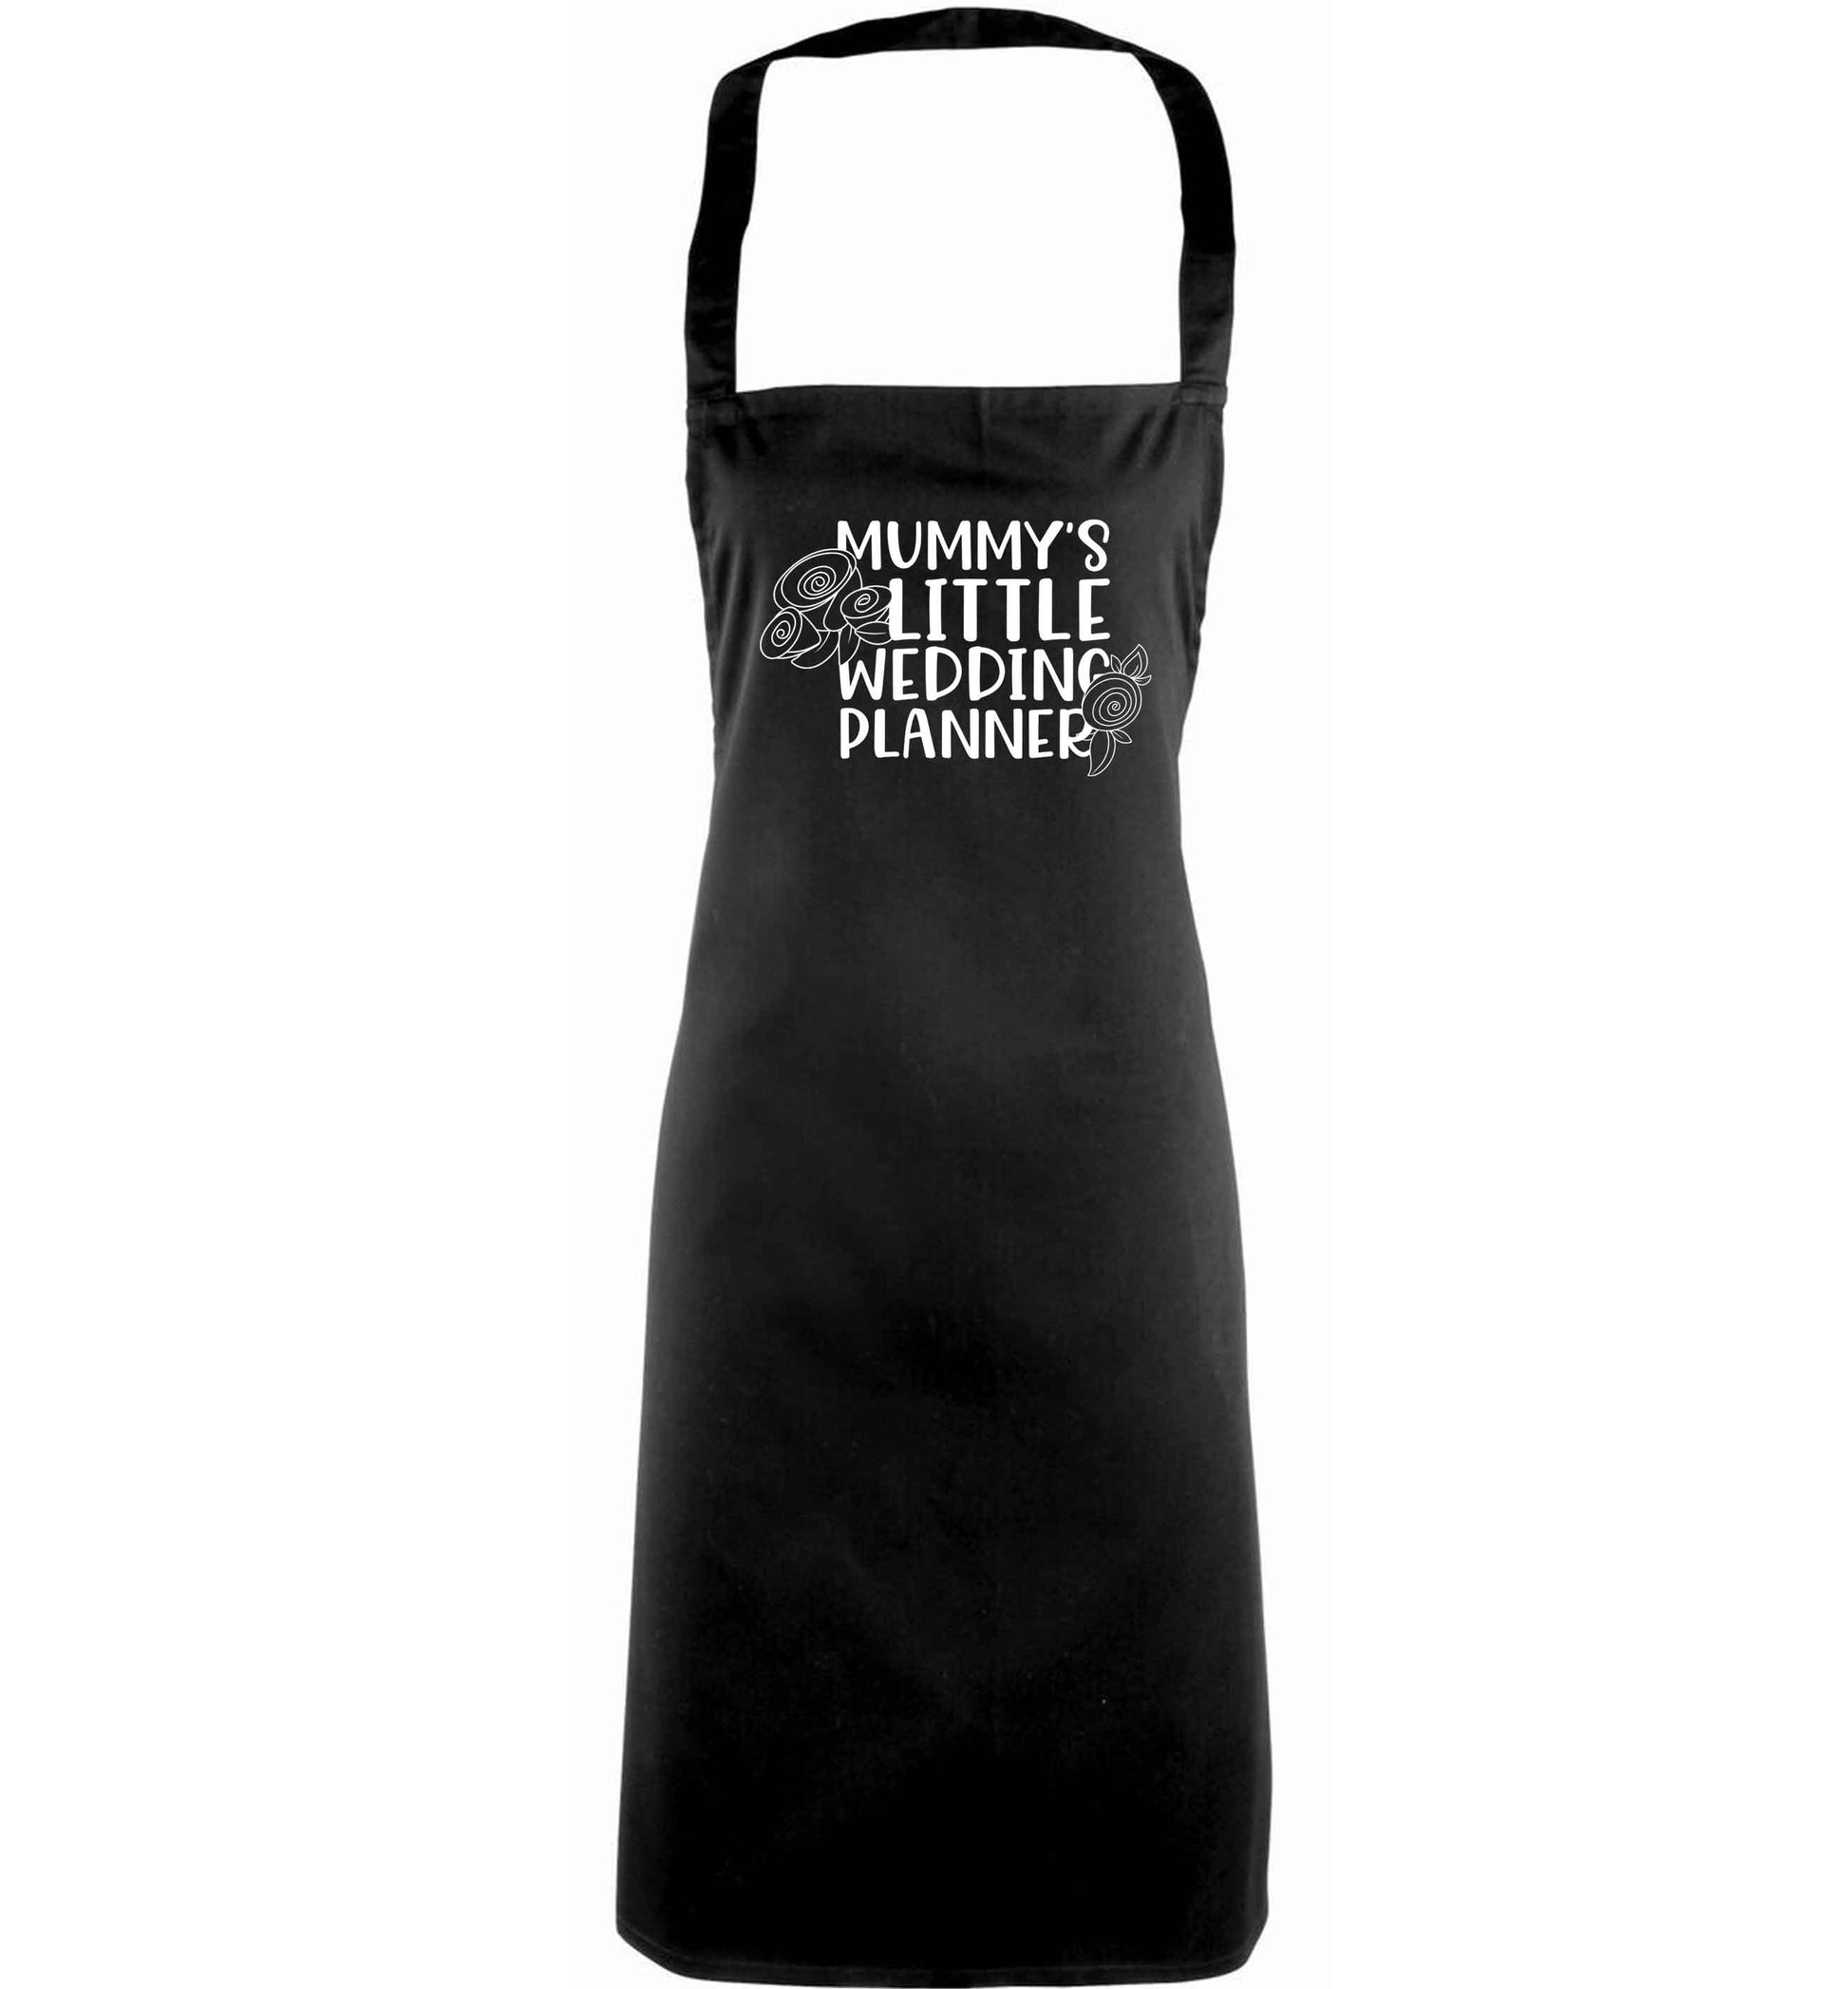 adorable wedding themed gifts for your mini wedding planner! adults black apron